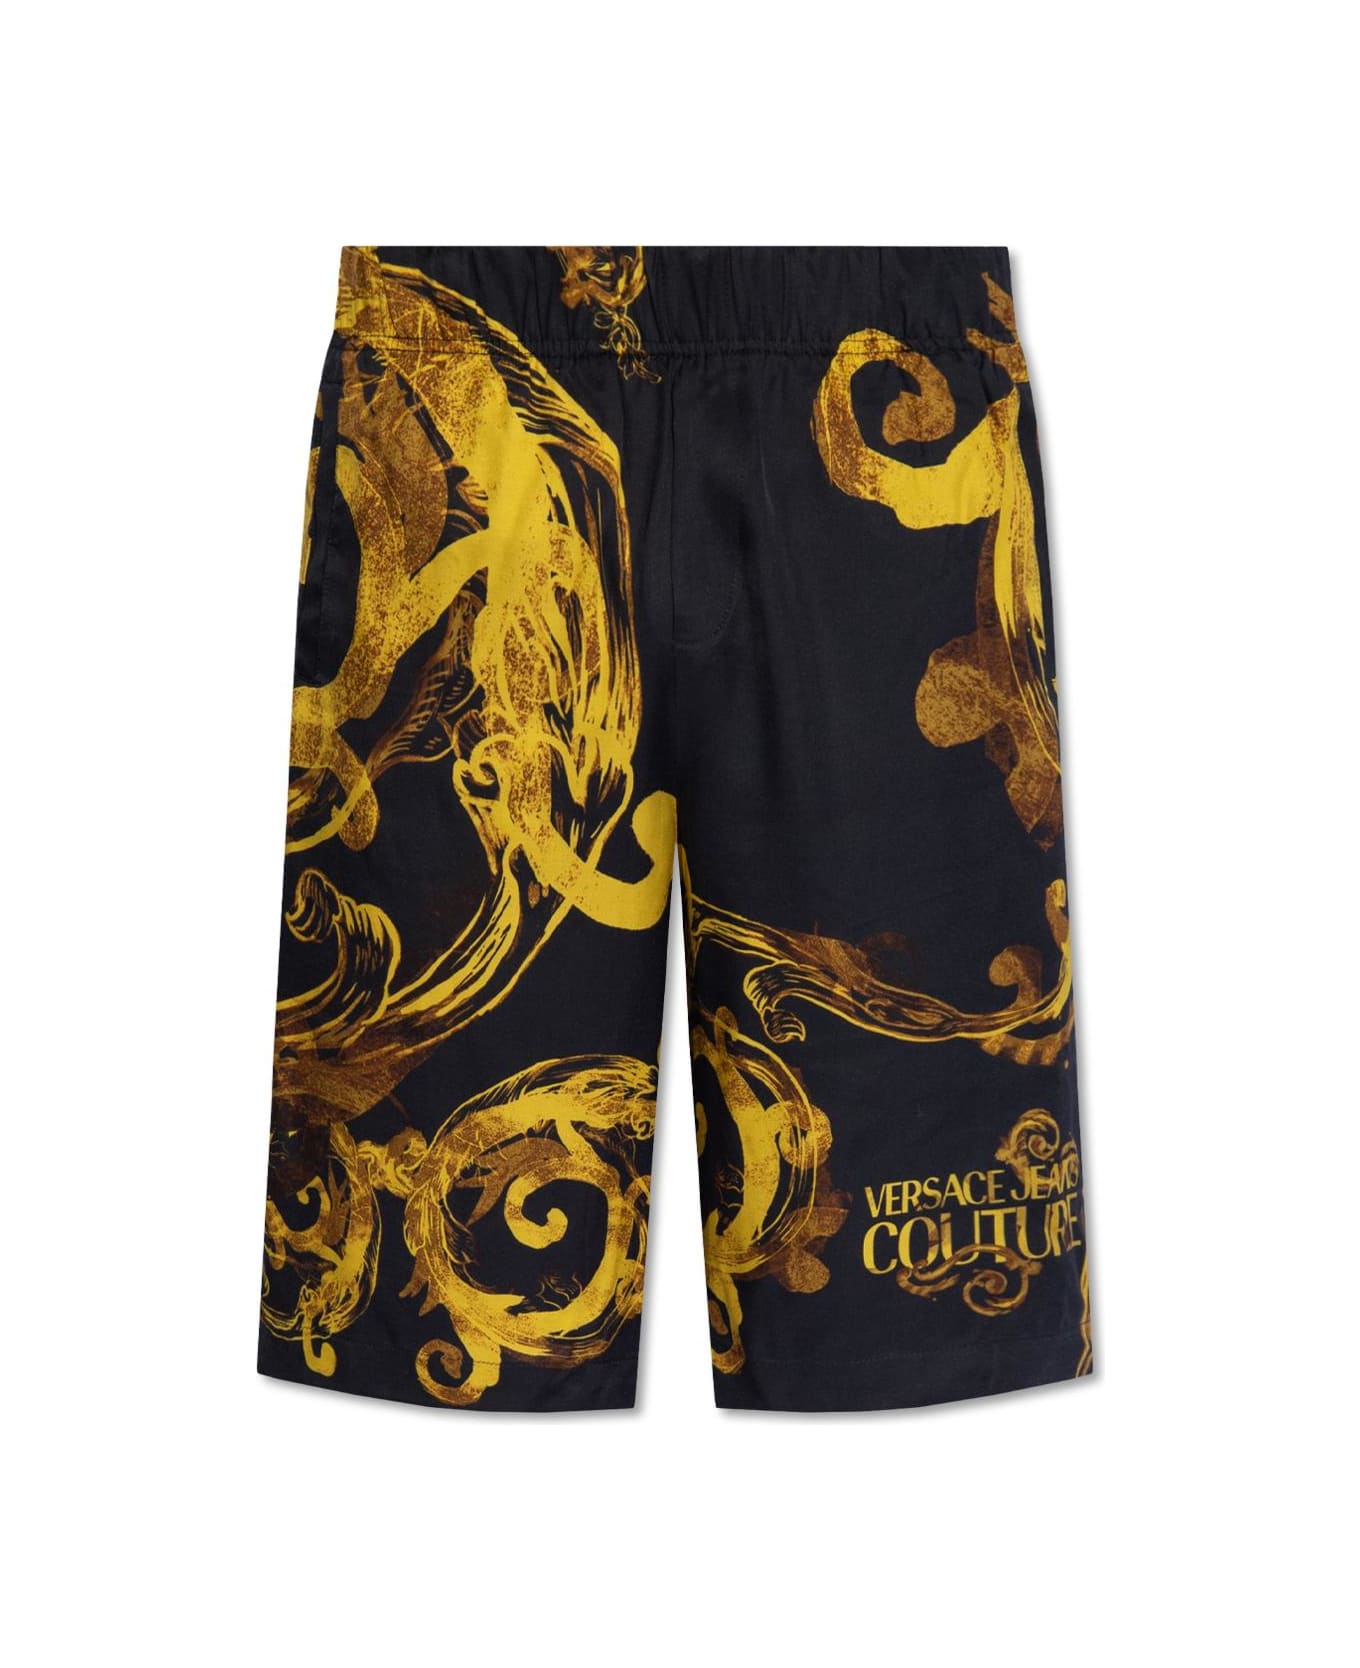 Versace Jeans Couture Printed Shorts - Black